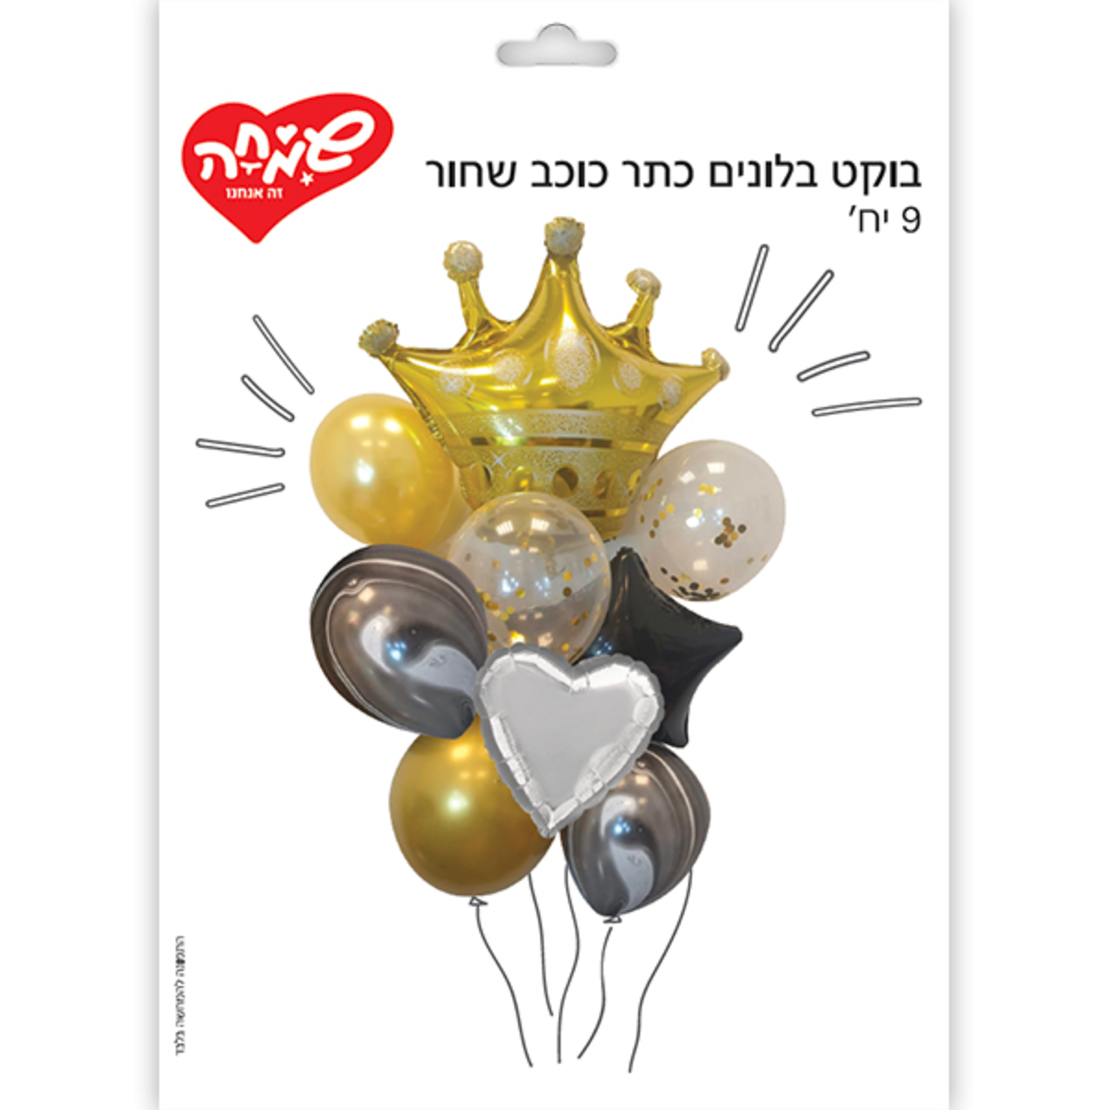 A bouquet of balloons and a crown